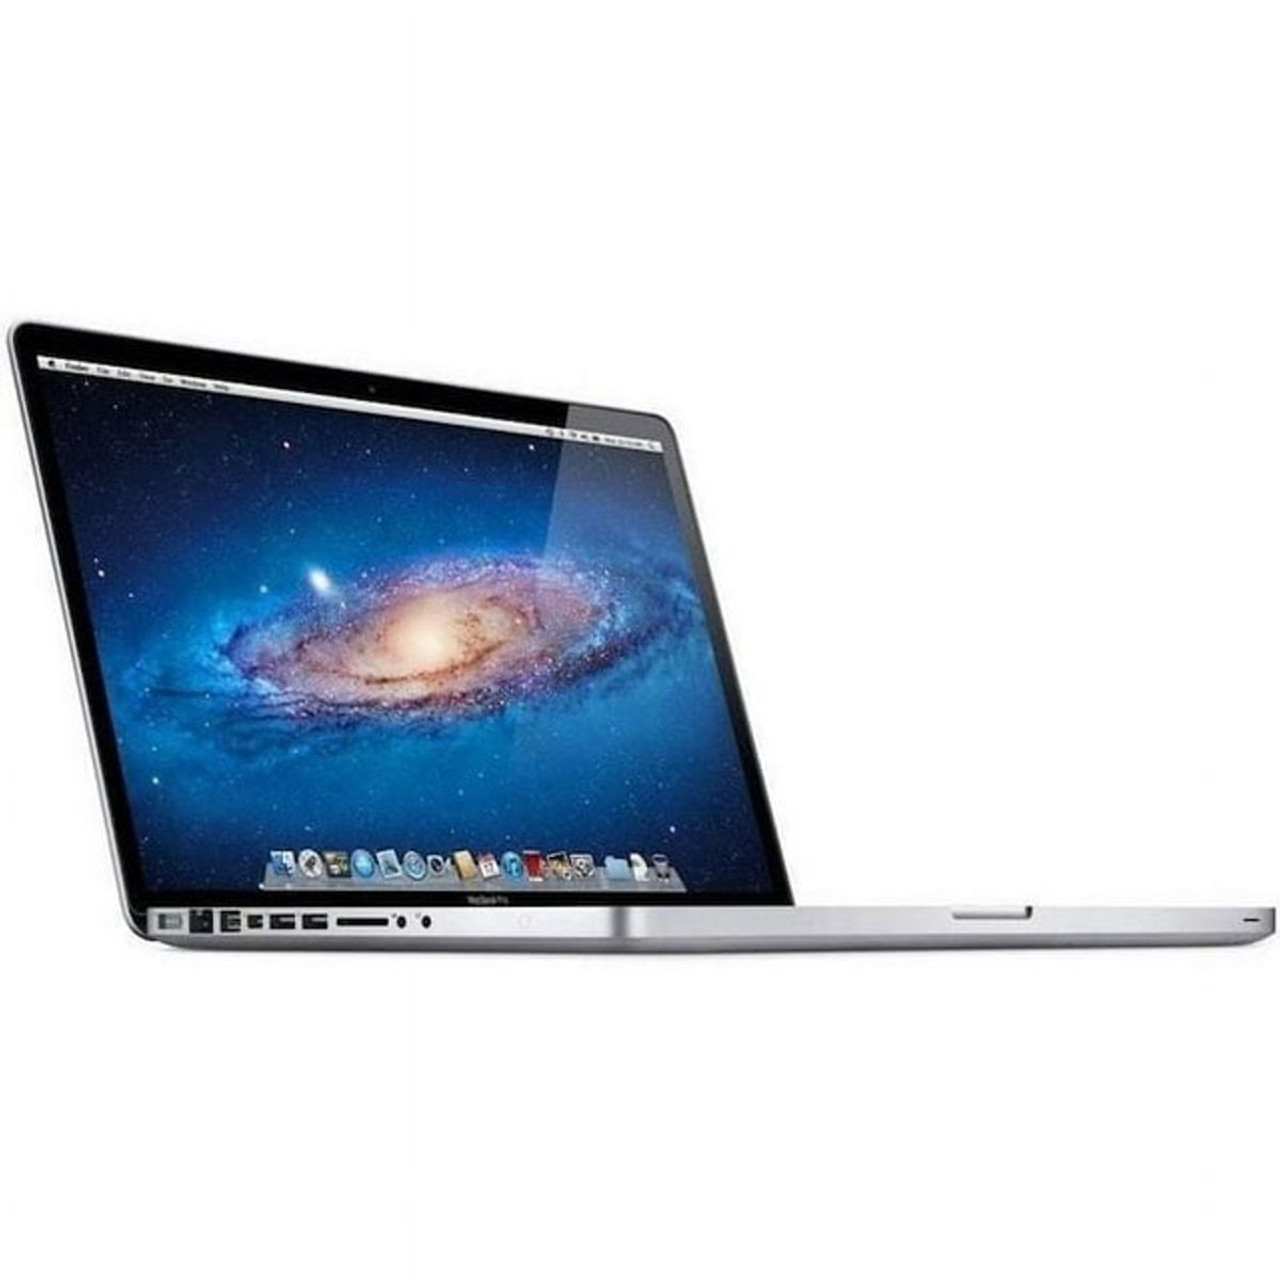 Apple Macbook Pro 13.3in Laptop (Intel Core i5 2.5Ghz 8GB, 500GB) product image